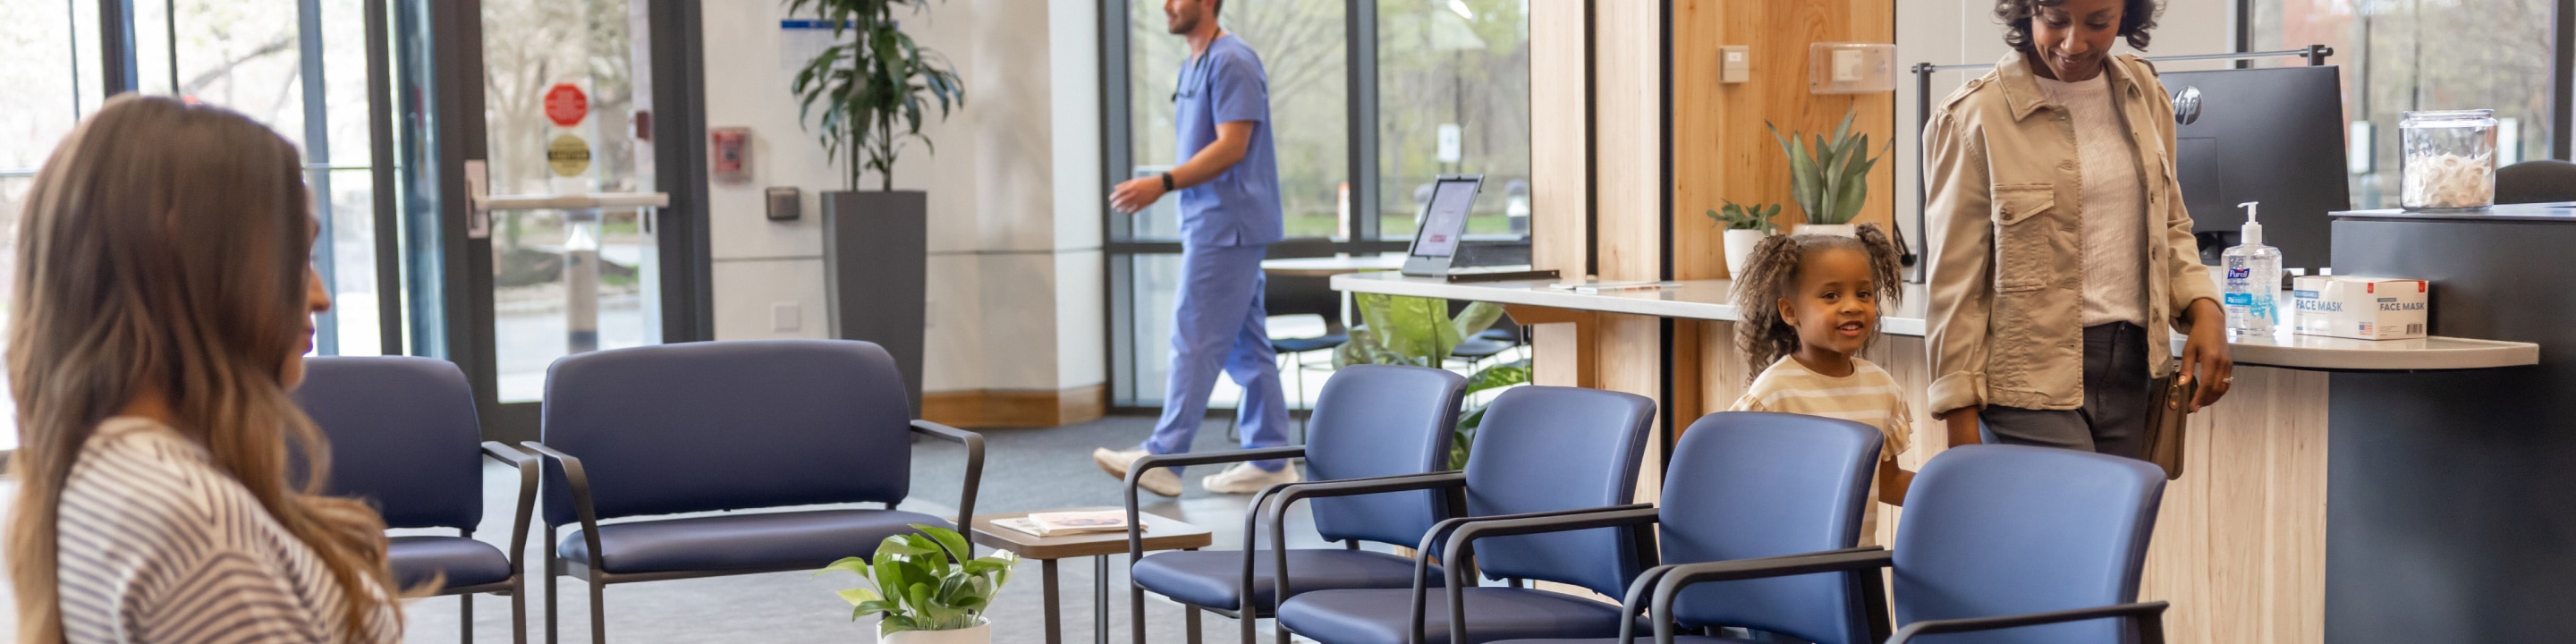 Create Welcoming & Productive Spaces for Patients and Healthcare Administrators